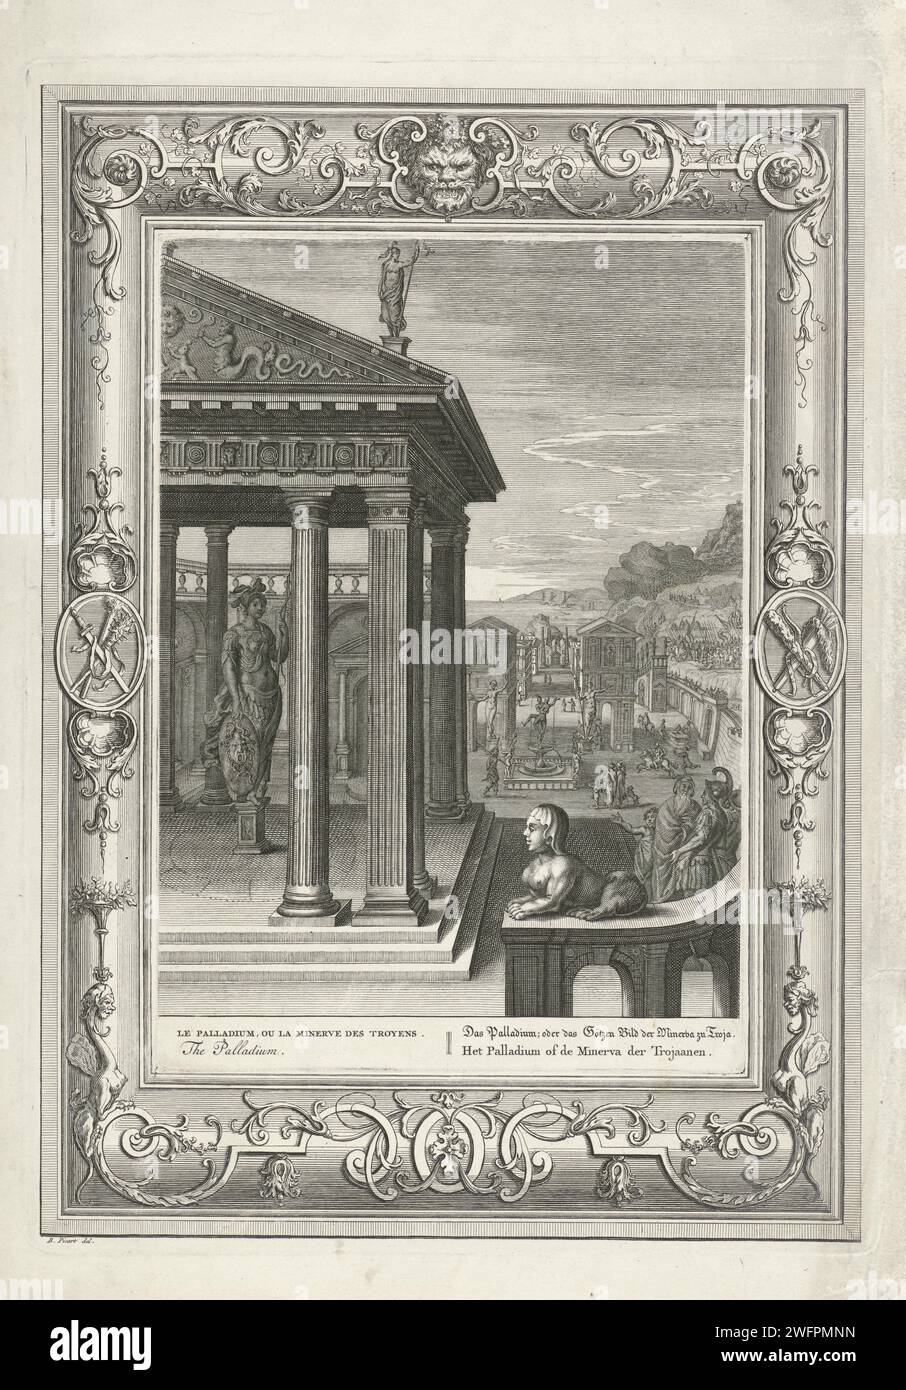 Tempel van Minerva te Troje, Bernard Picart (workshop of), after Bernard Picart, 1733 print In the foreground the temple with the Trojan cult image of Minerva (Palladium). In the background a face on the city. In the margin the title in French, English, German and Dutch. The performance is decorated with an ornamental edge. Amsterdam paper etching / engraving the Temple (in general)  Jewish religion. (story of) Minerva (Pallas, Athena). scrollwork, strapwork  ornament Stock Photo